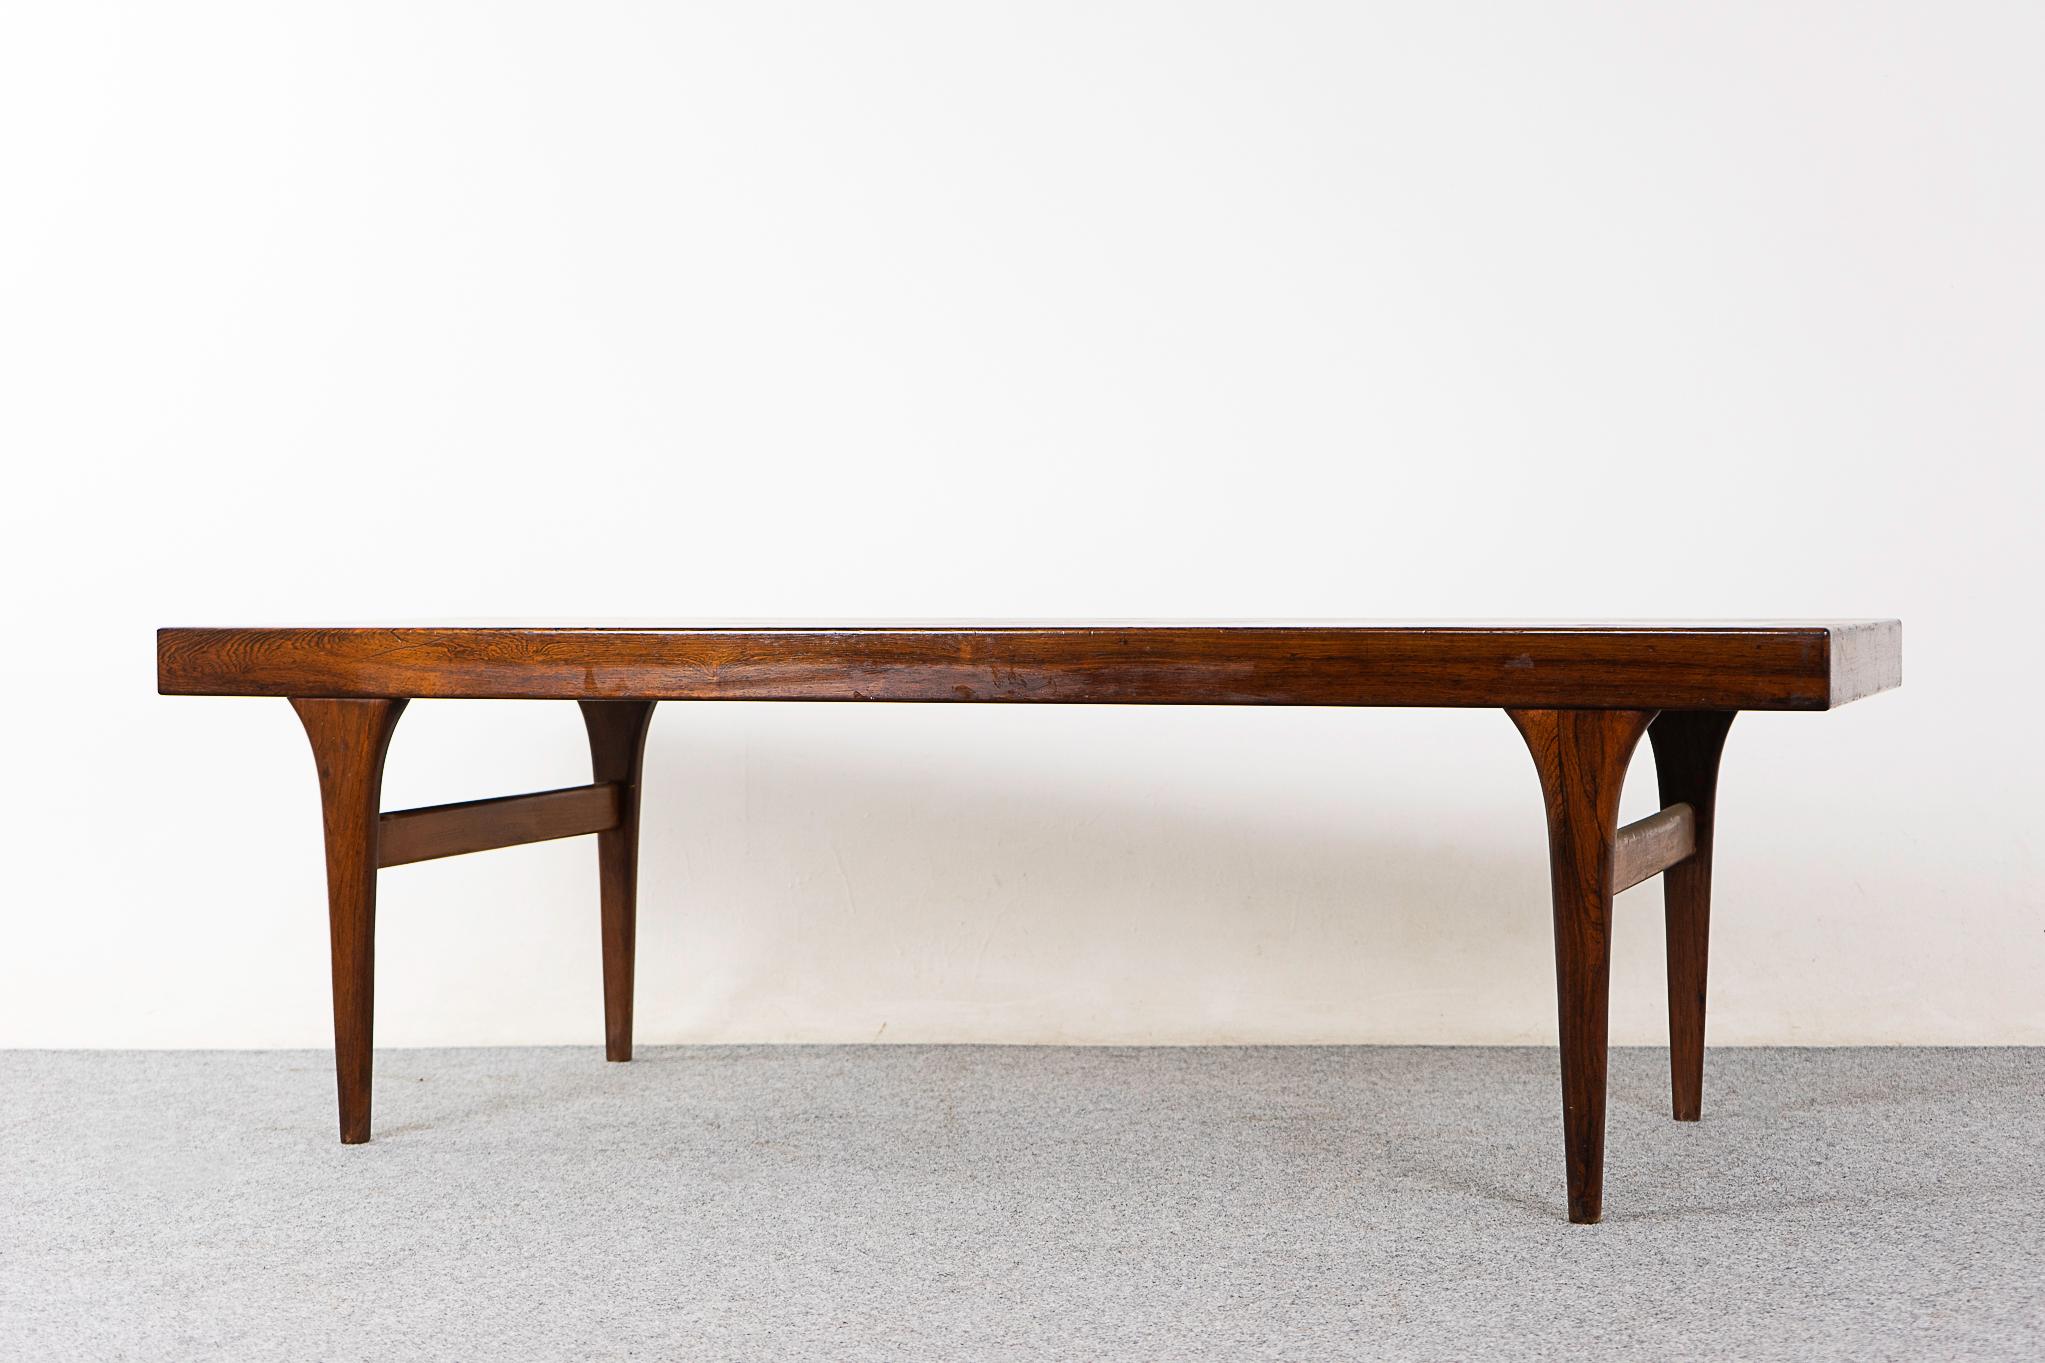 Danish Mid-Century Modern Rosewood & Tile Coffee Table by Johannes Andersen For Sale 1